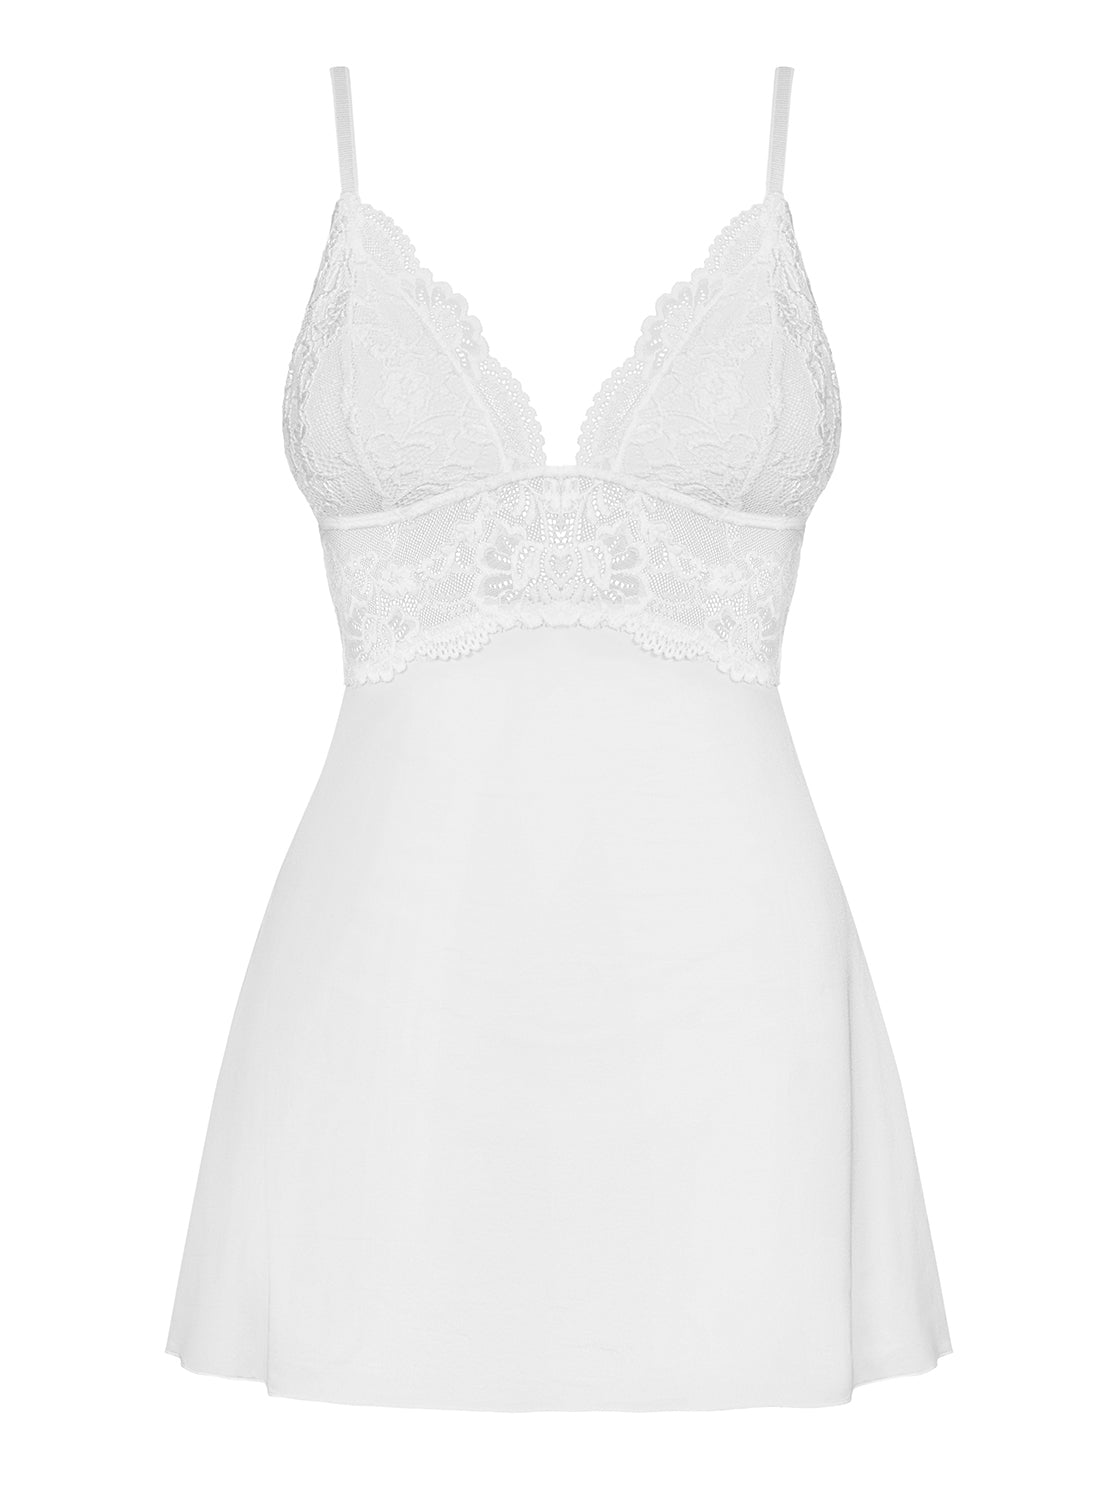 Sexy White Lace Bridal Babydoll Lingerie